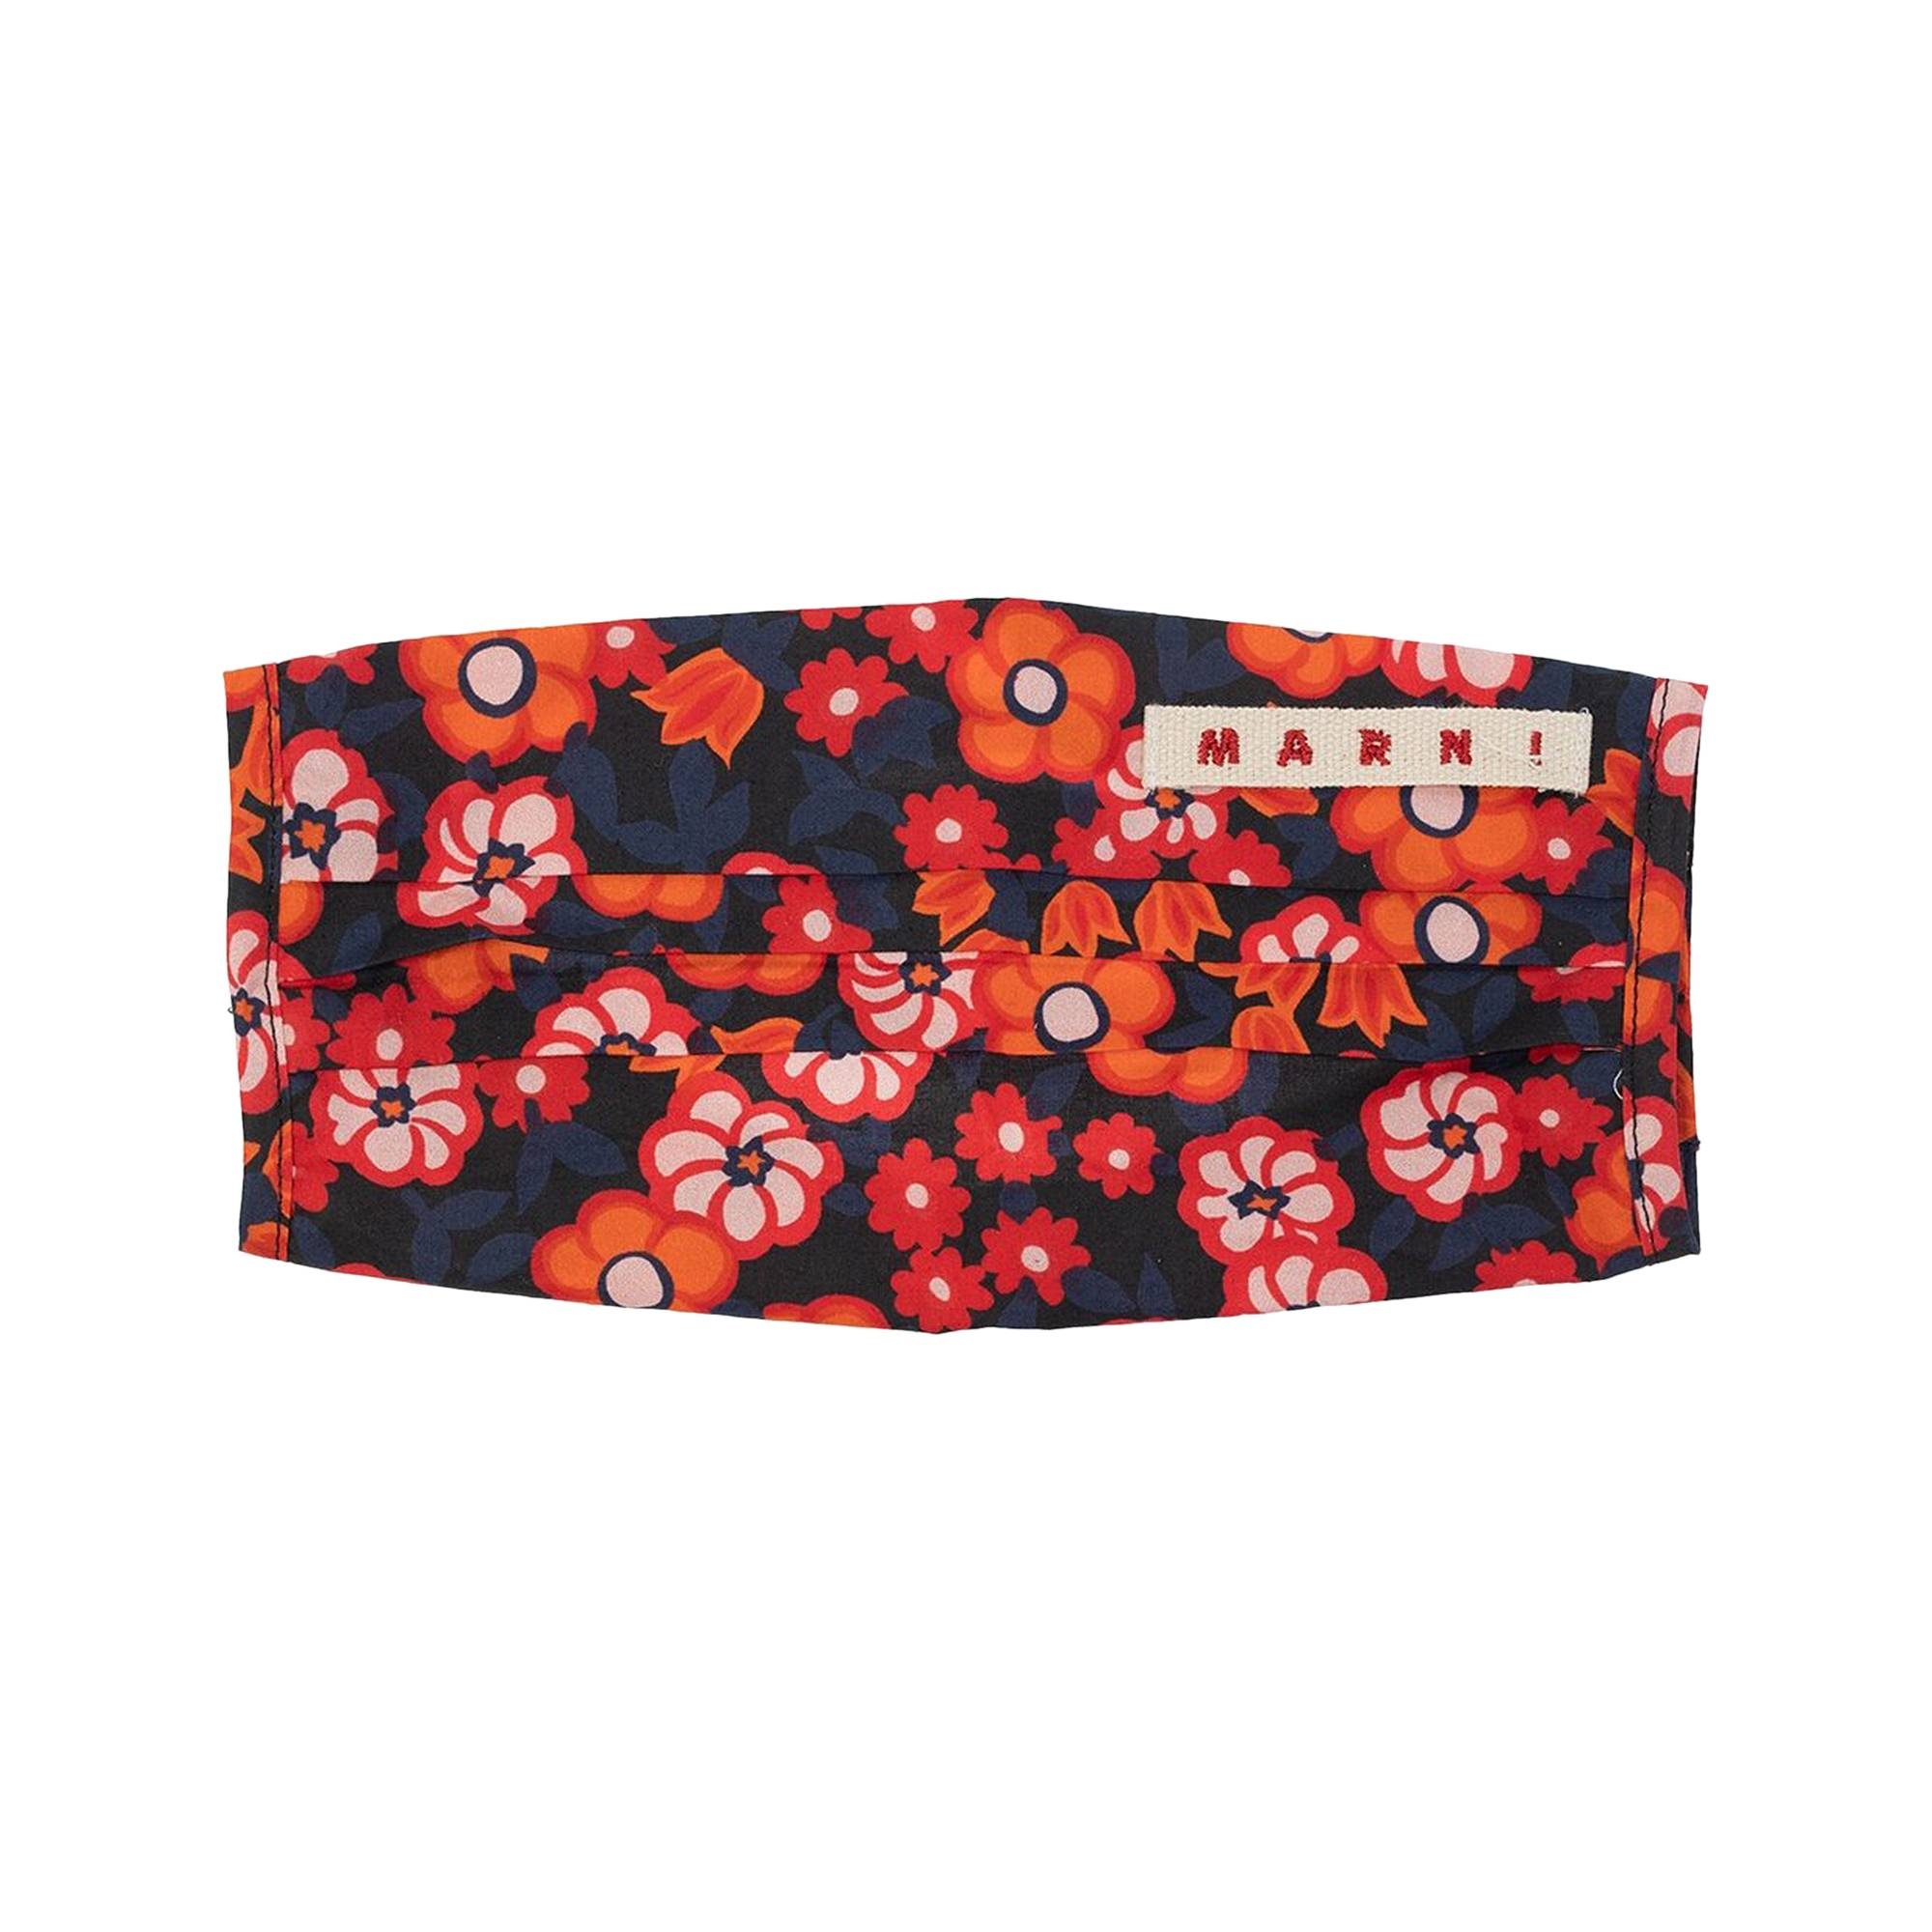 Marni Logo Floral Facemask 'Red' - 1